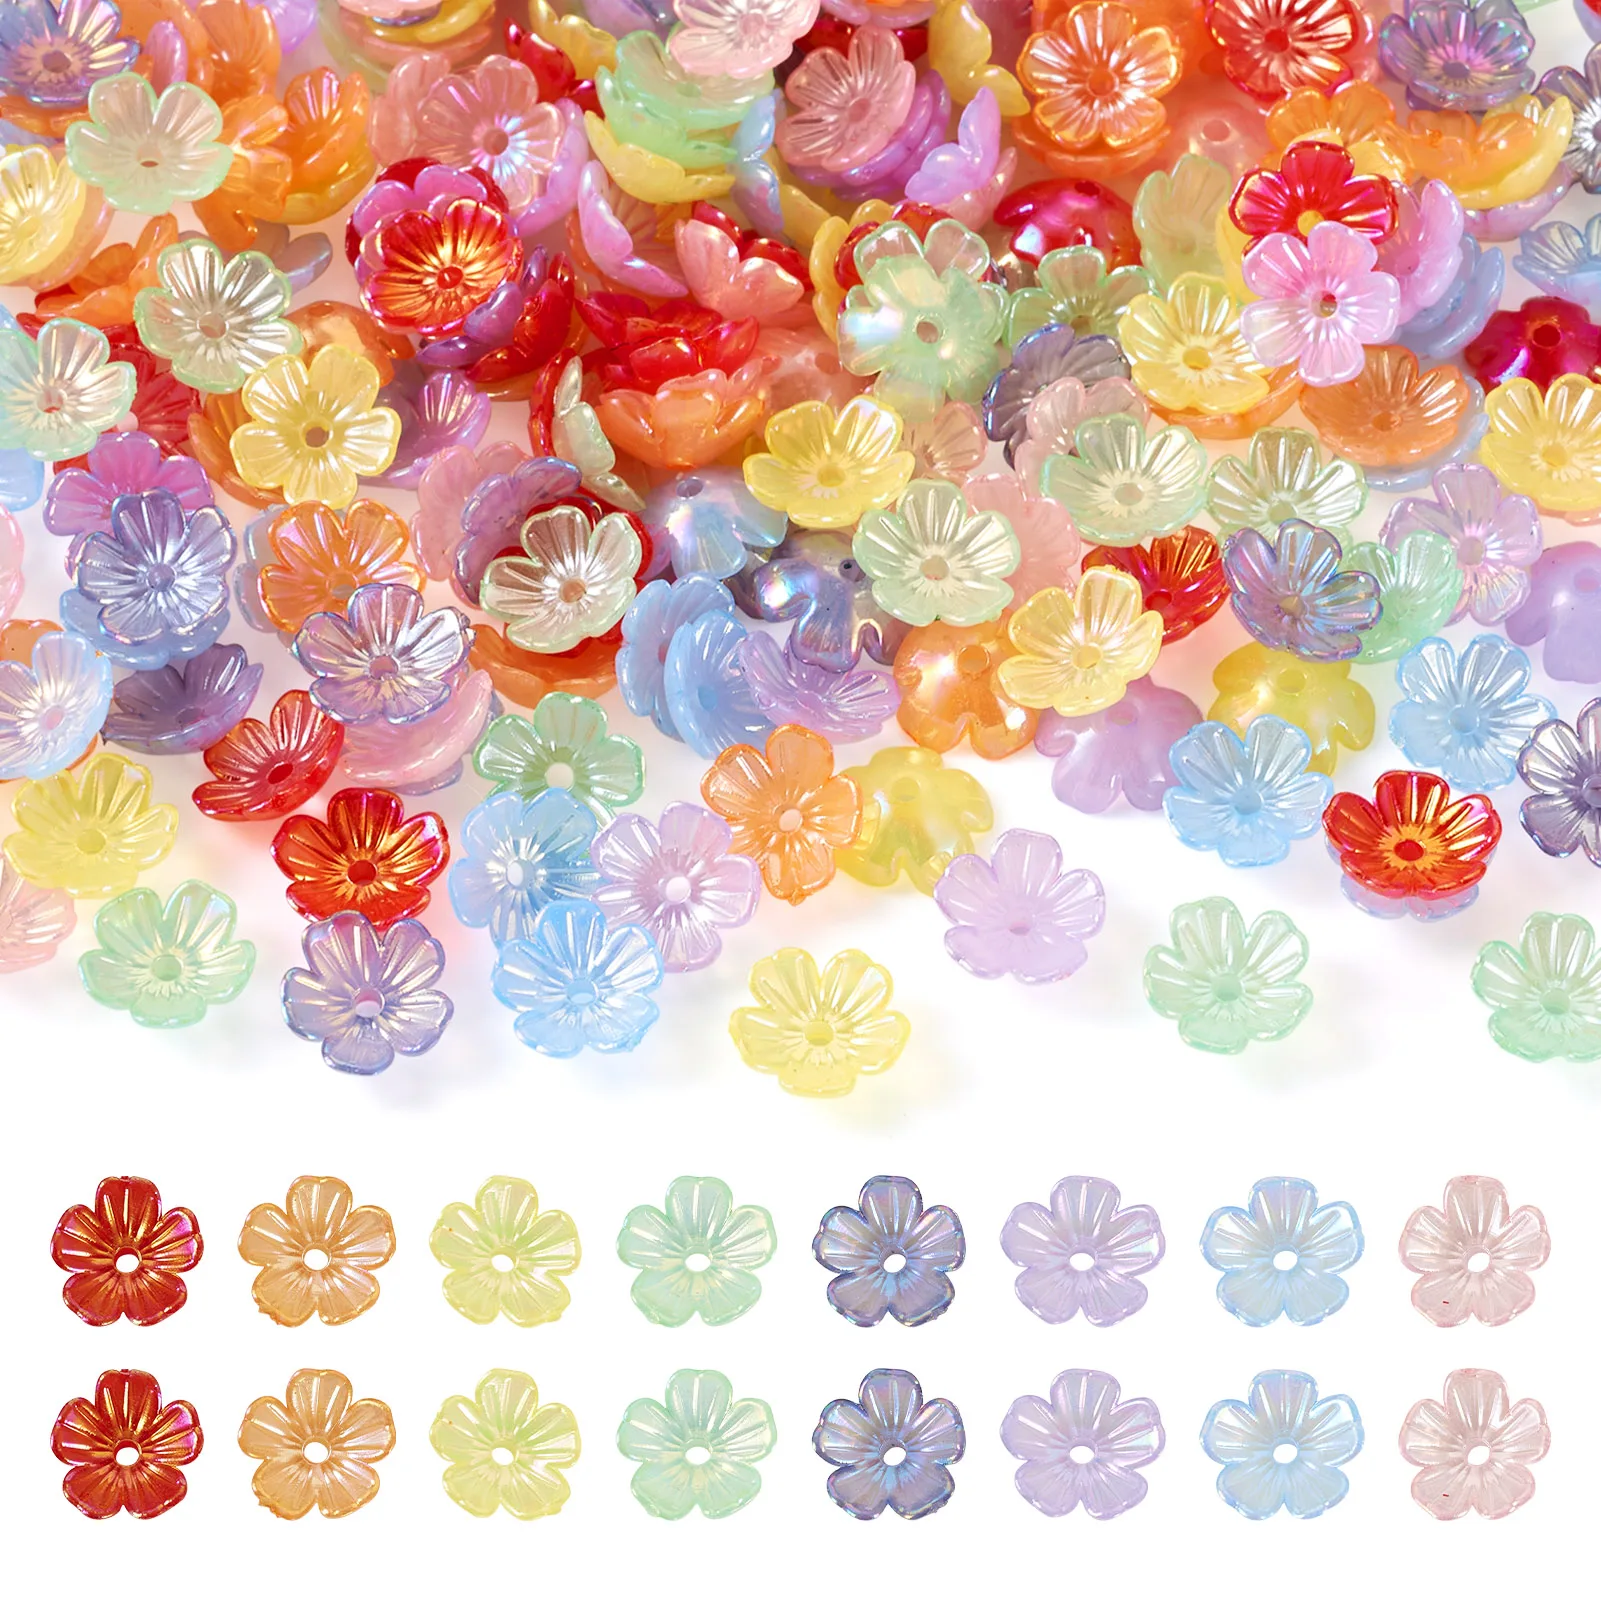 

280pcs 10x4mm Acrylic Flower Bead Caps Colorful Petal End Bead Caps for Women Girls Dangle Earrings Jewelry Making Accessories